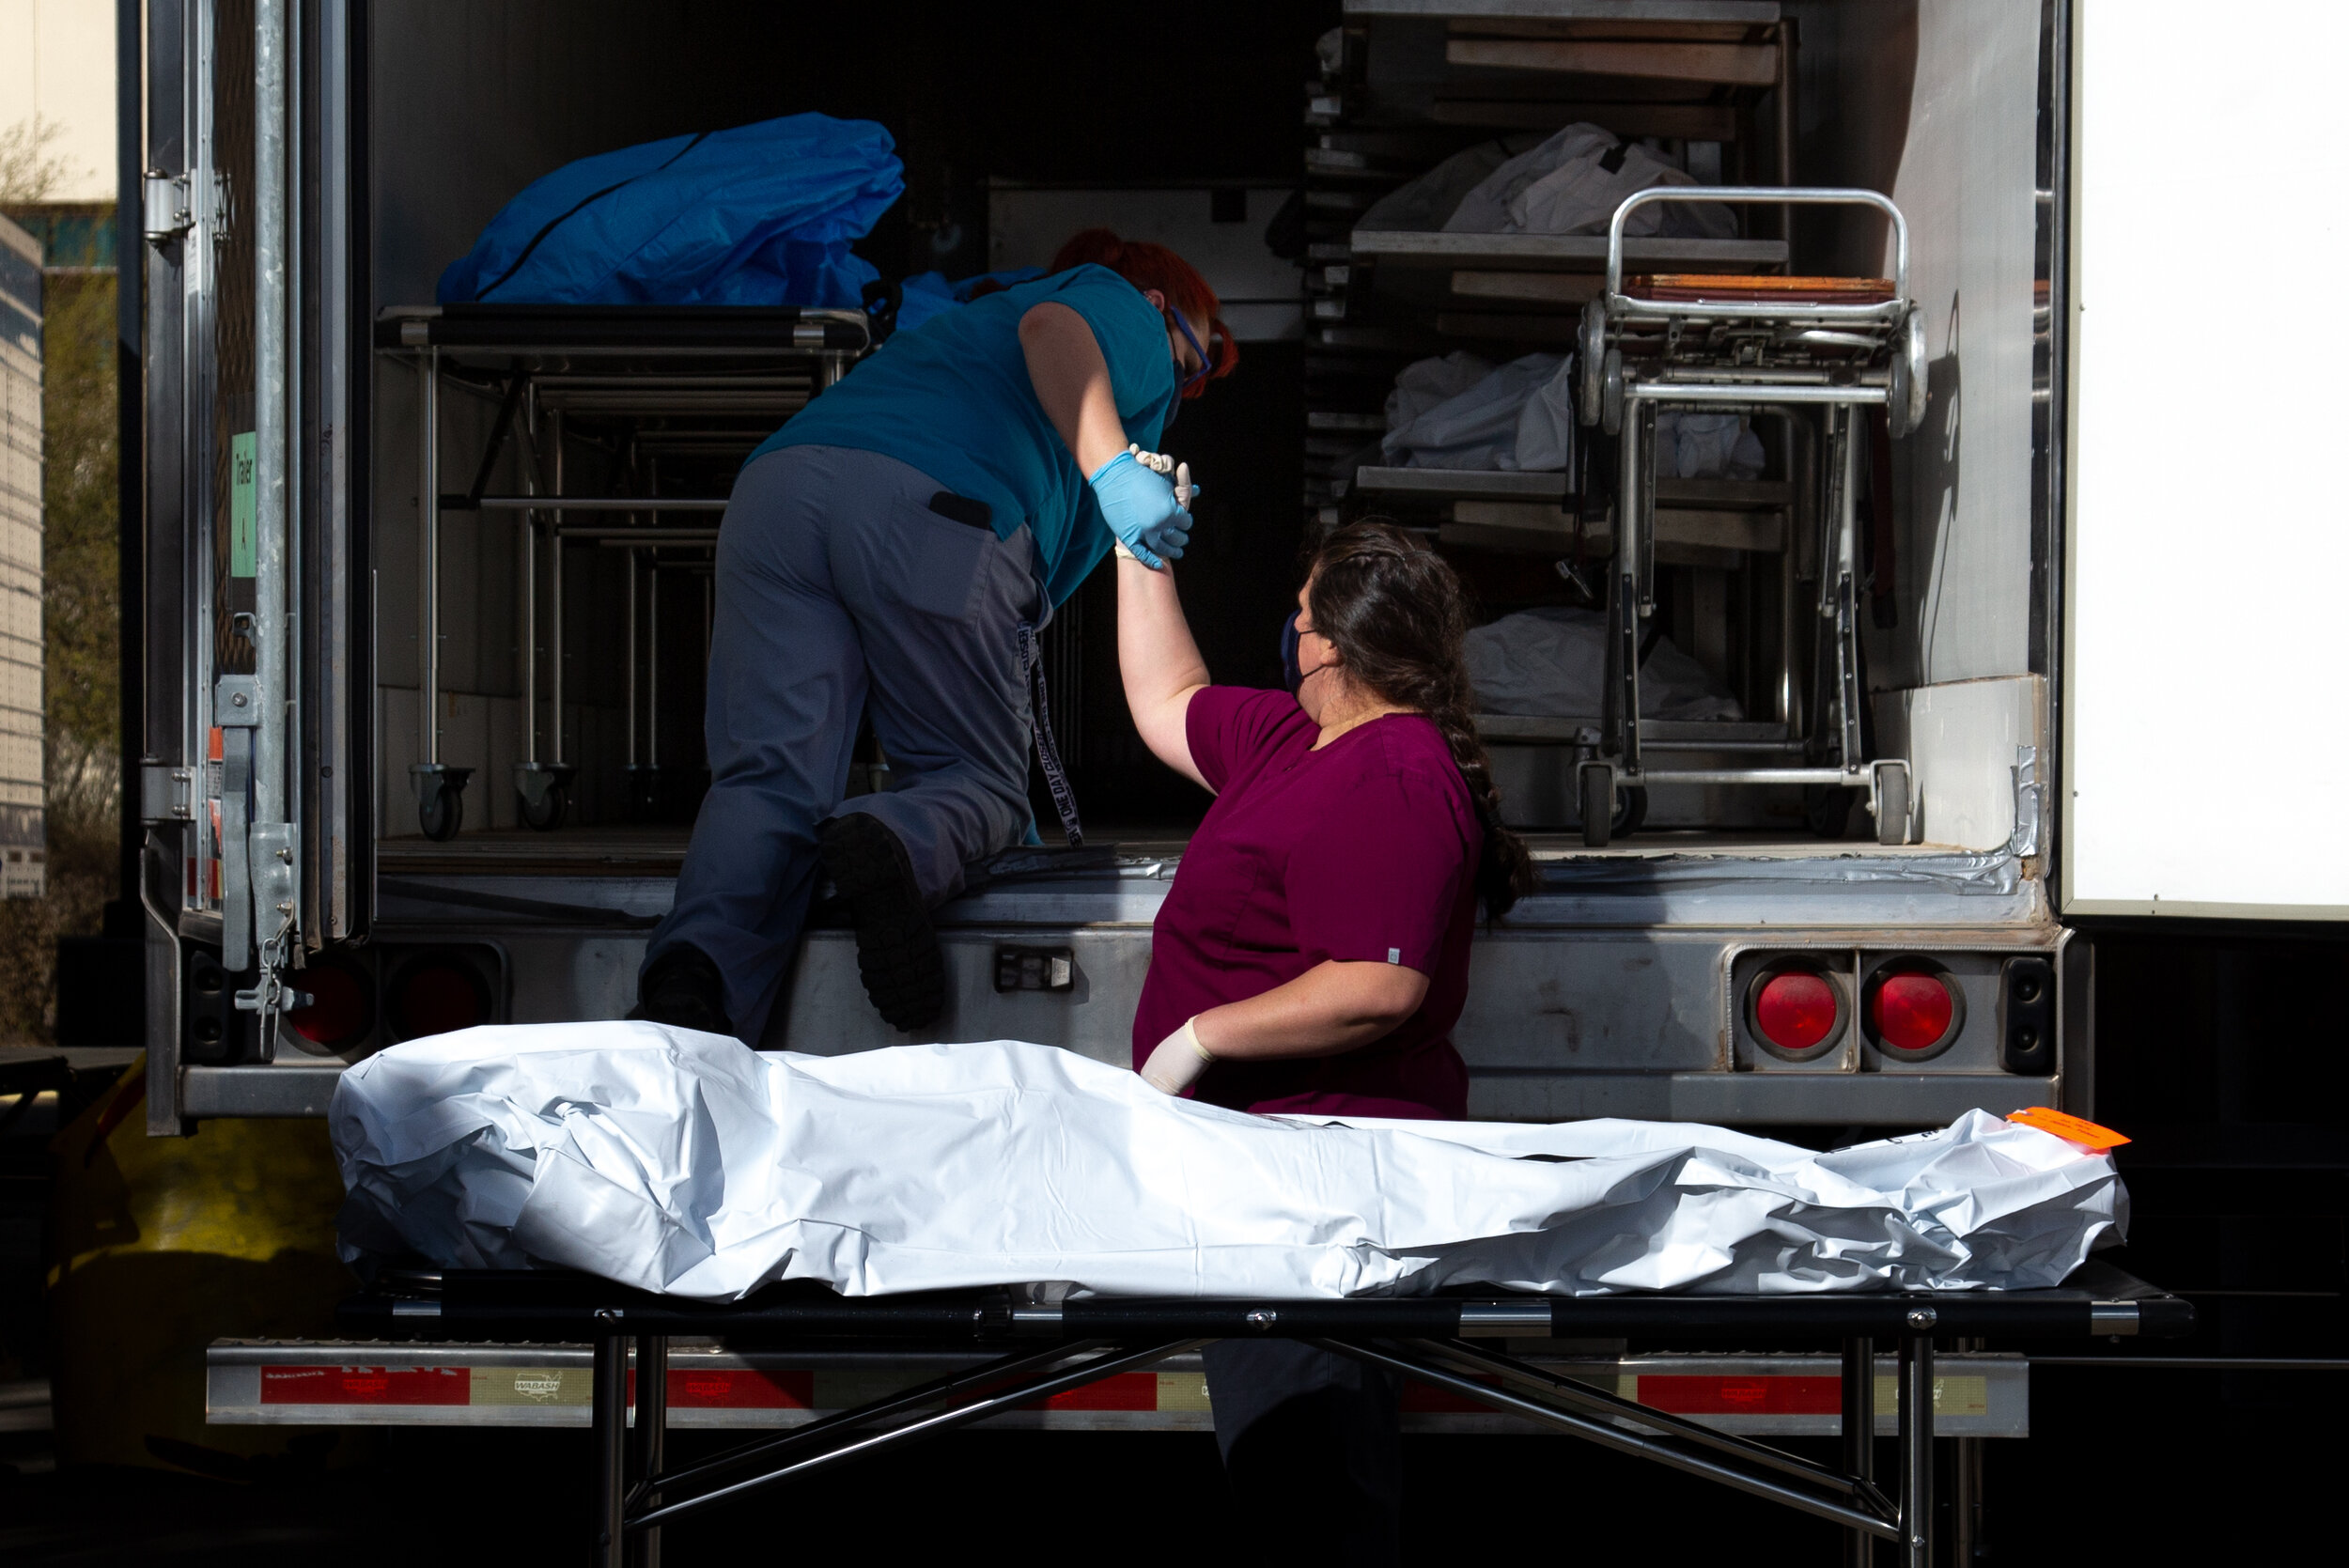  Employees of the Pima County Medical Examiner's office prepare to move a body into a refrigerated semi-truck at the Pima County Office of the Medical Examiner on January 14, 2021 in Tucson, Arizona. After reaching capacity amid the COVID-19 pandemic